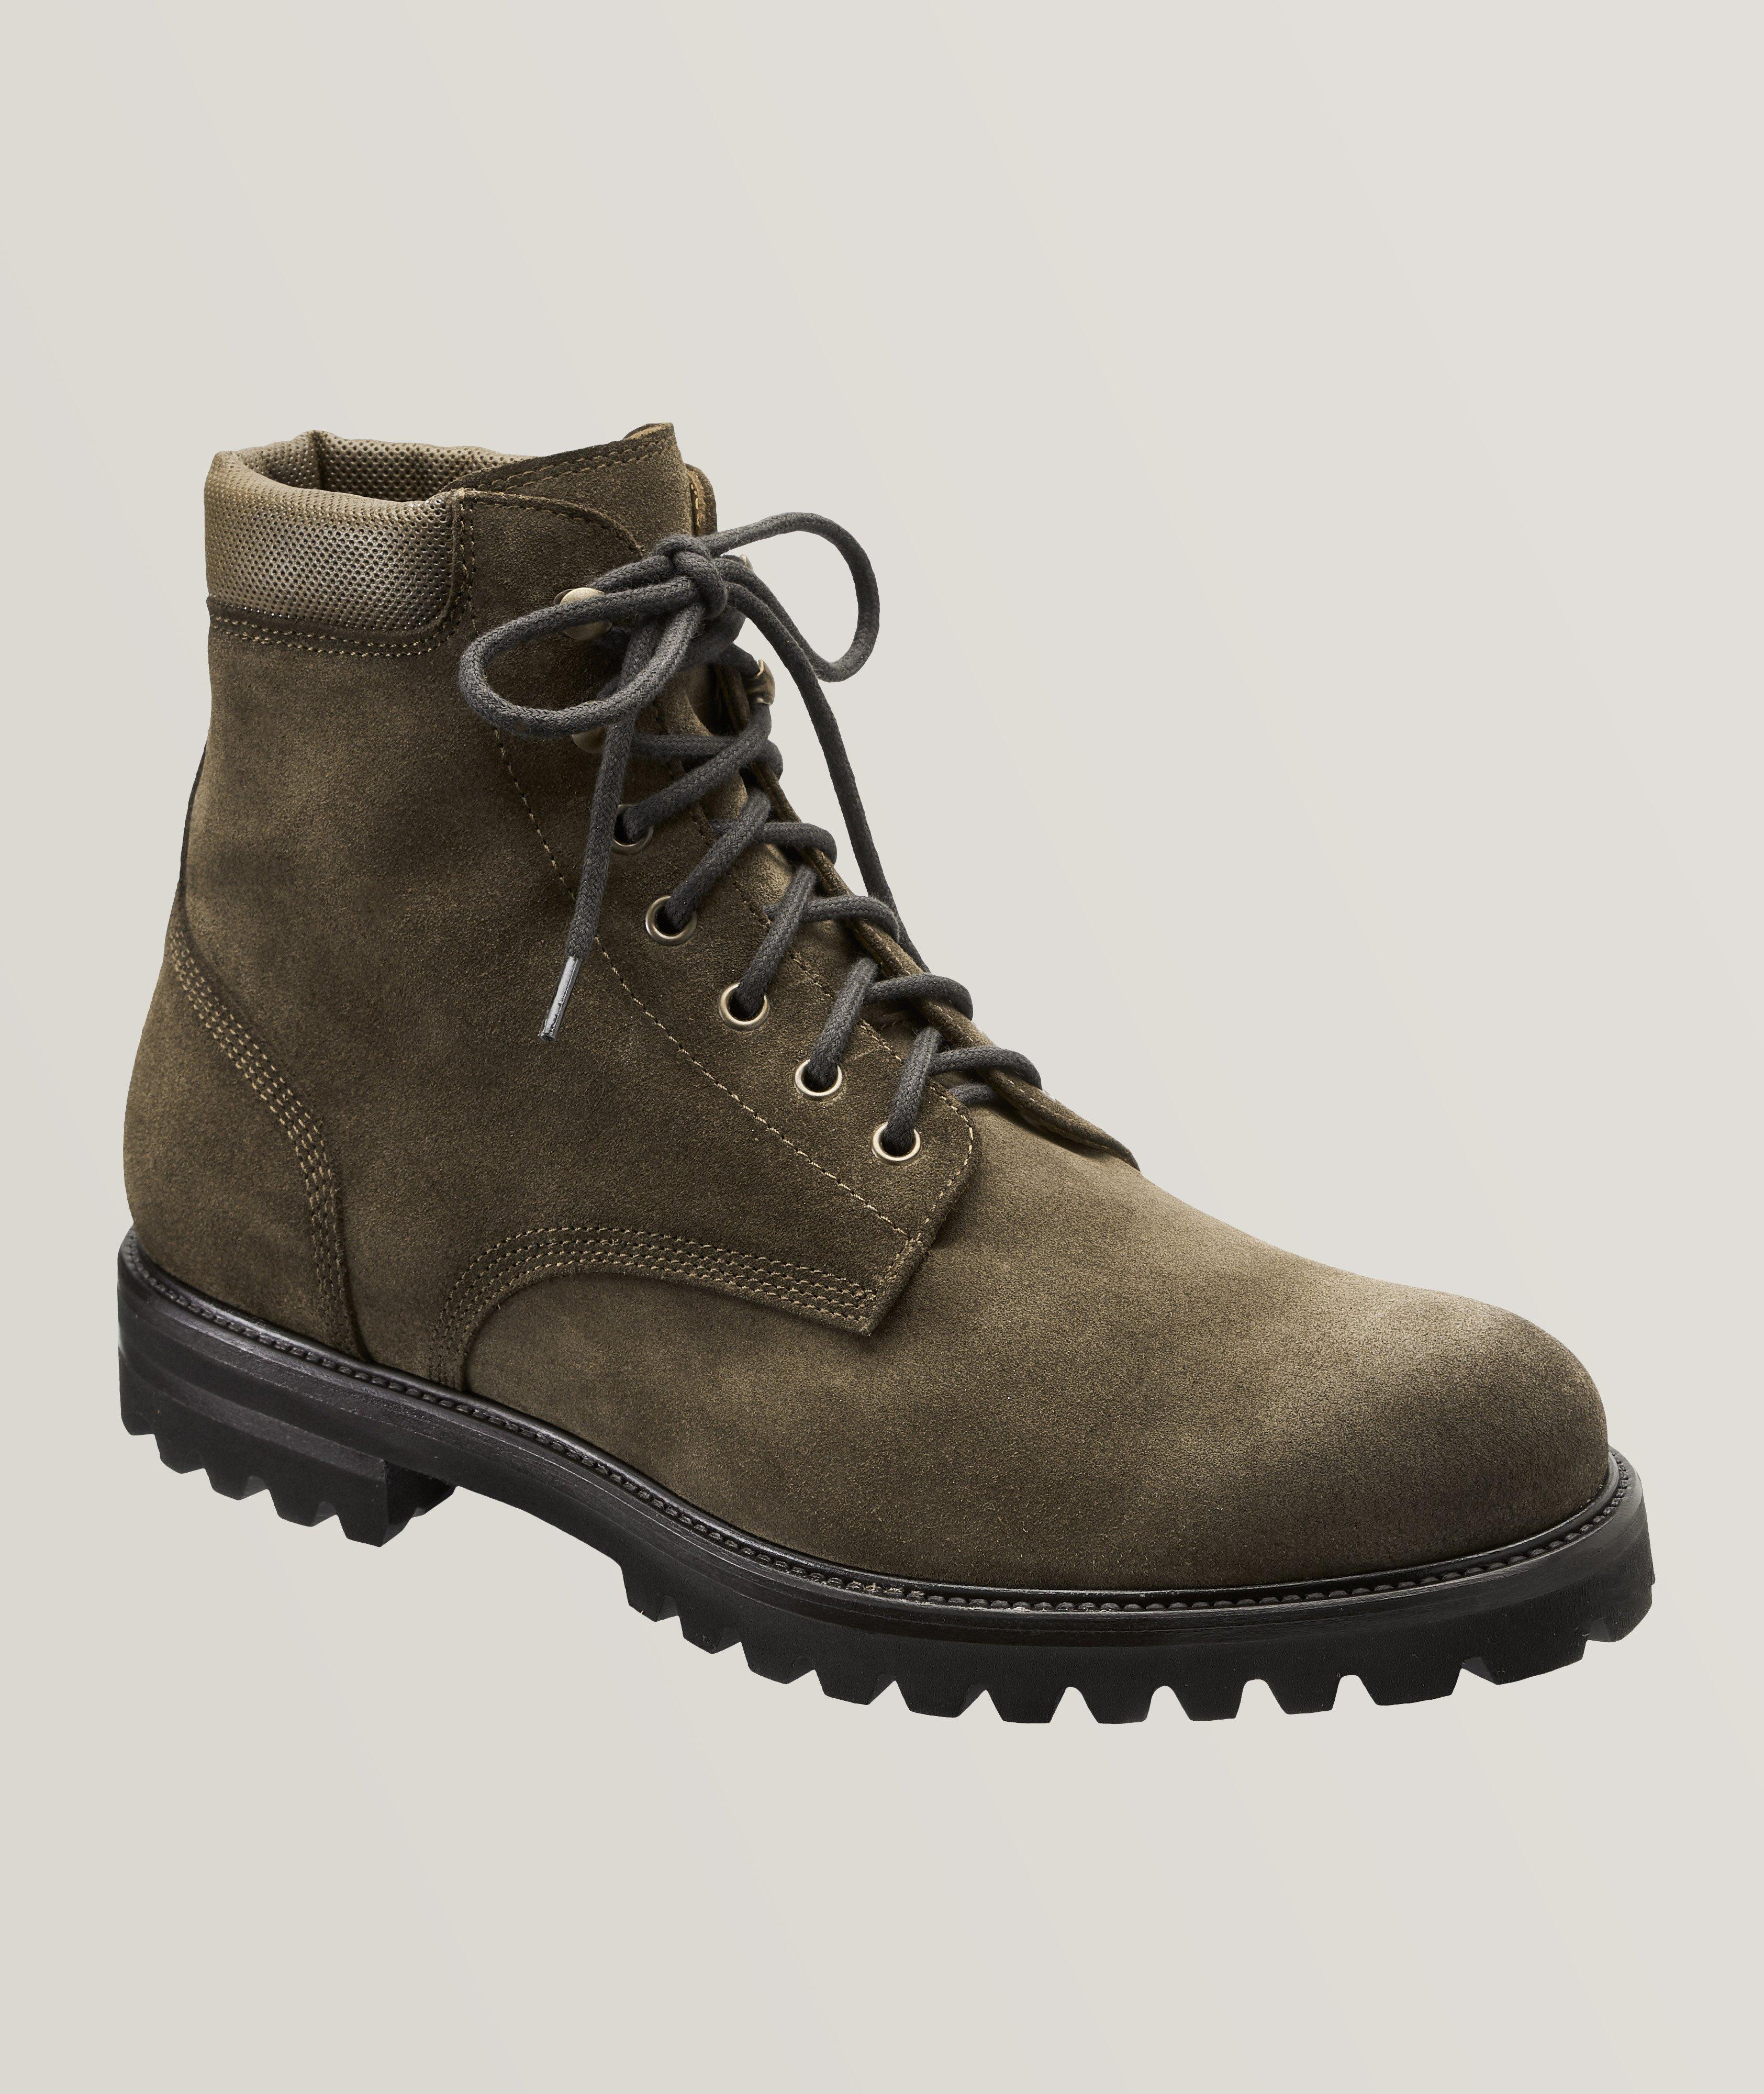 Suede Lace-Up Lug Boot image 0